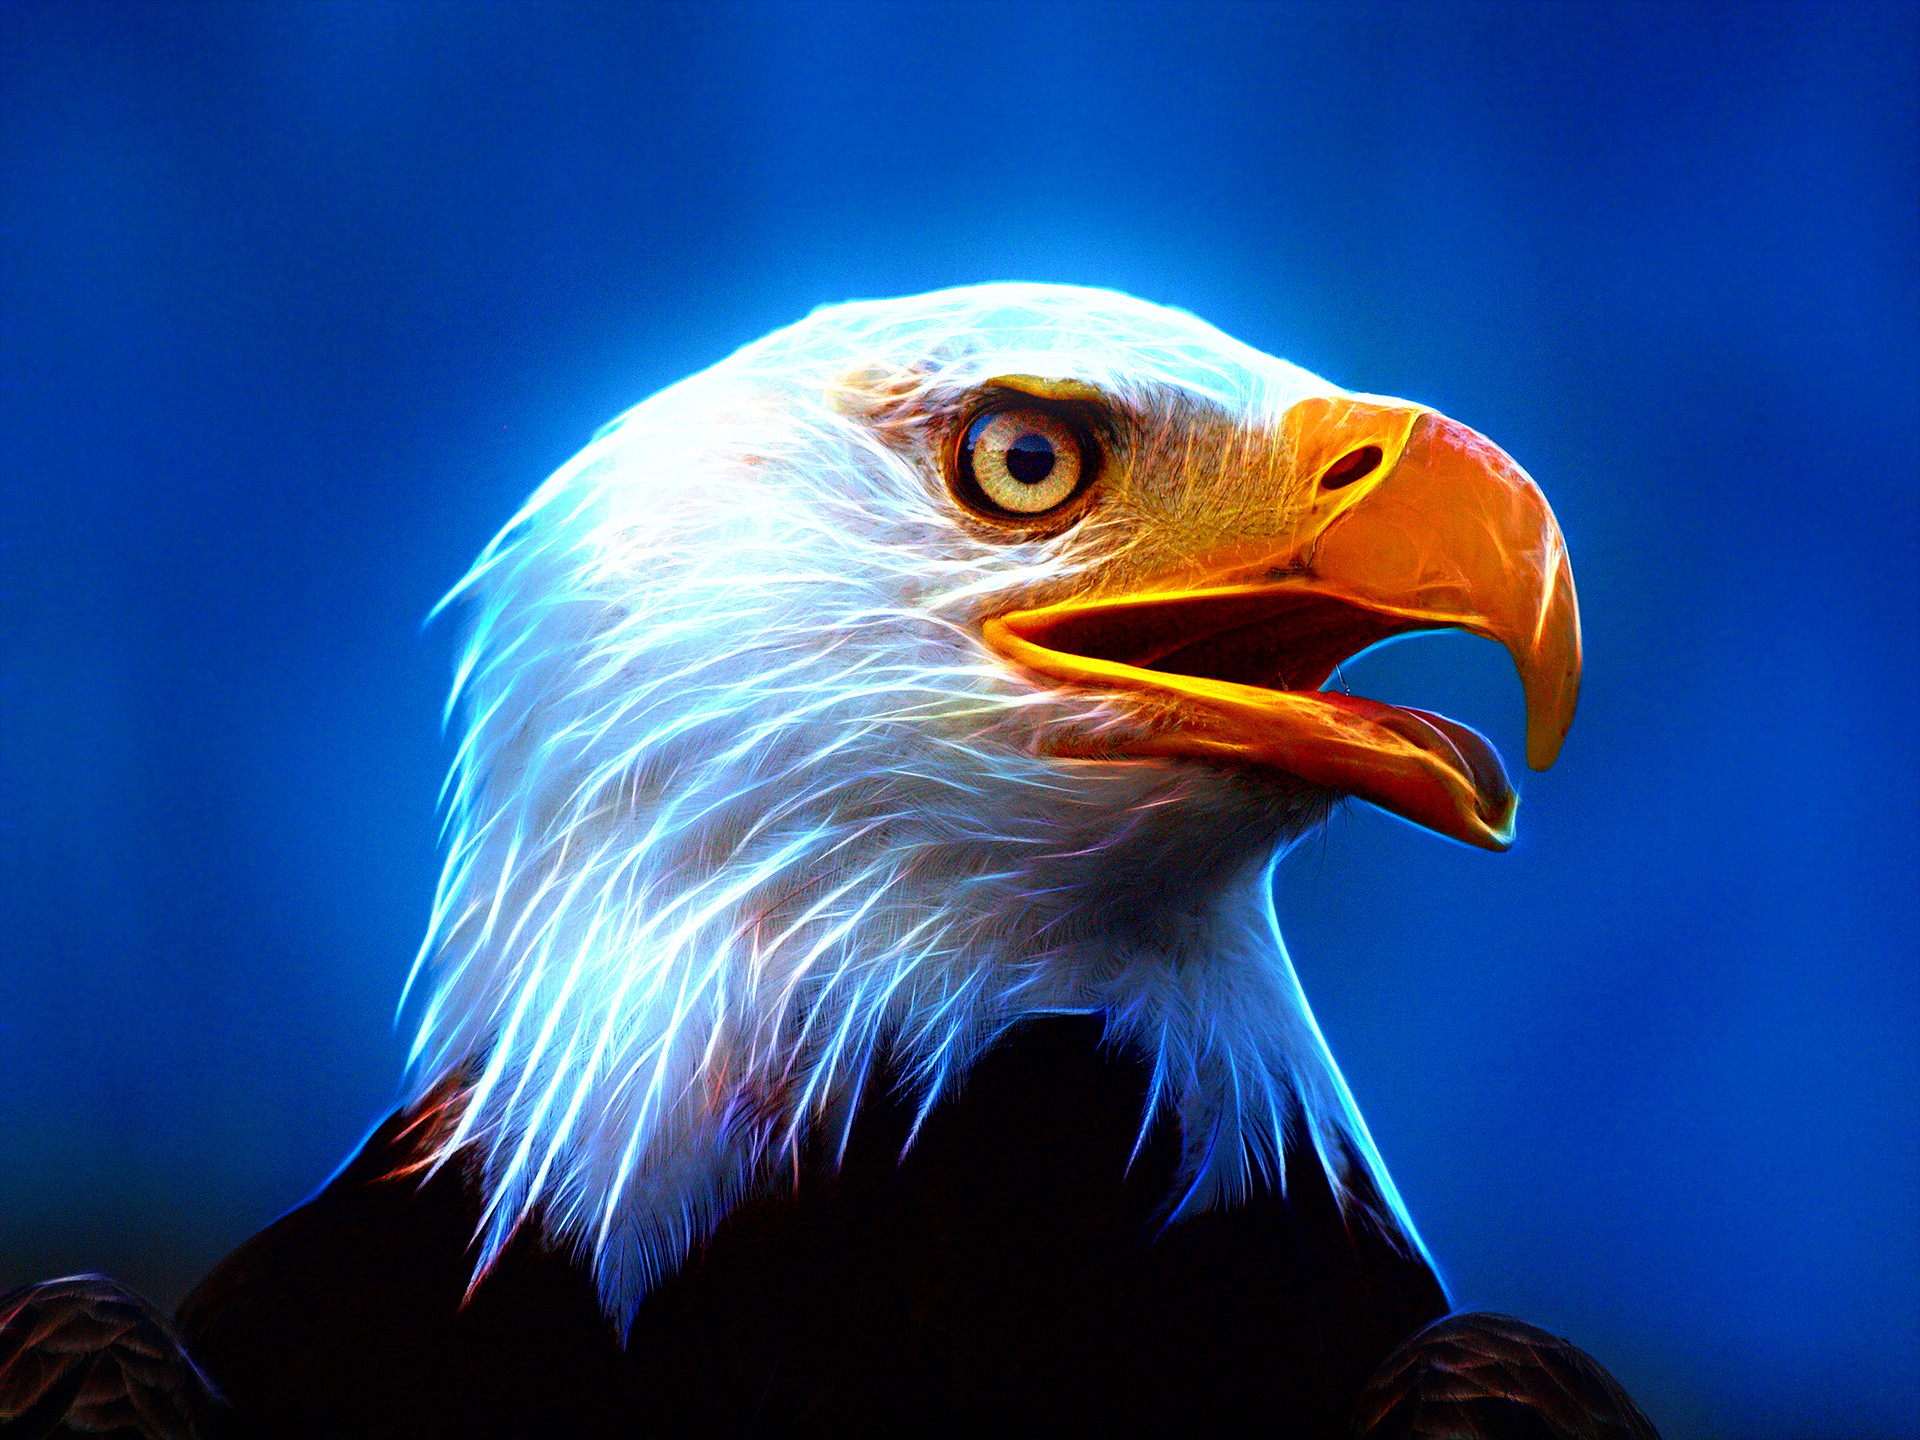 1920x1440 Eagle Wallpapers, Download Eagle HD Wallpapers for Free, GuoGuiyan  1920Ã1440 Eagle Wallpapers